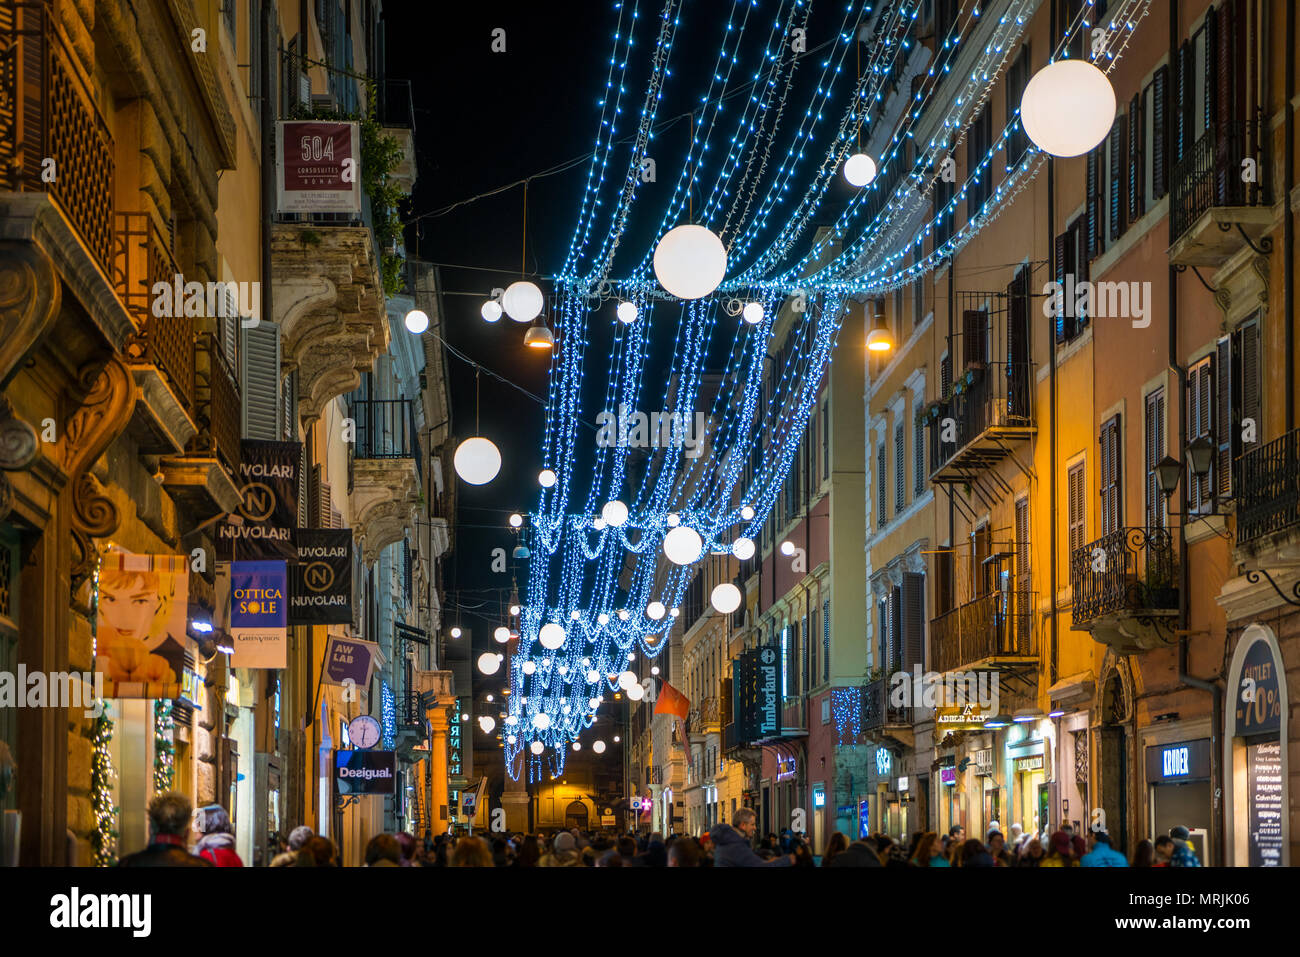 Via del Corso in Rome during Christmas time. Italy Stock Photo